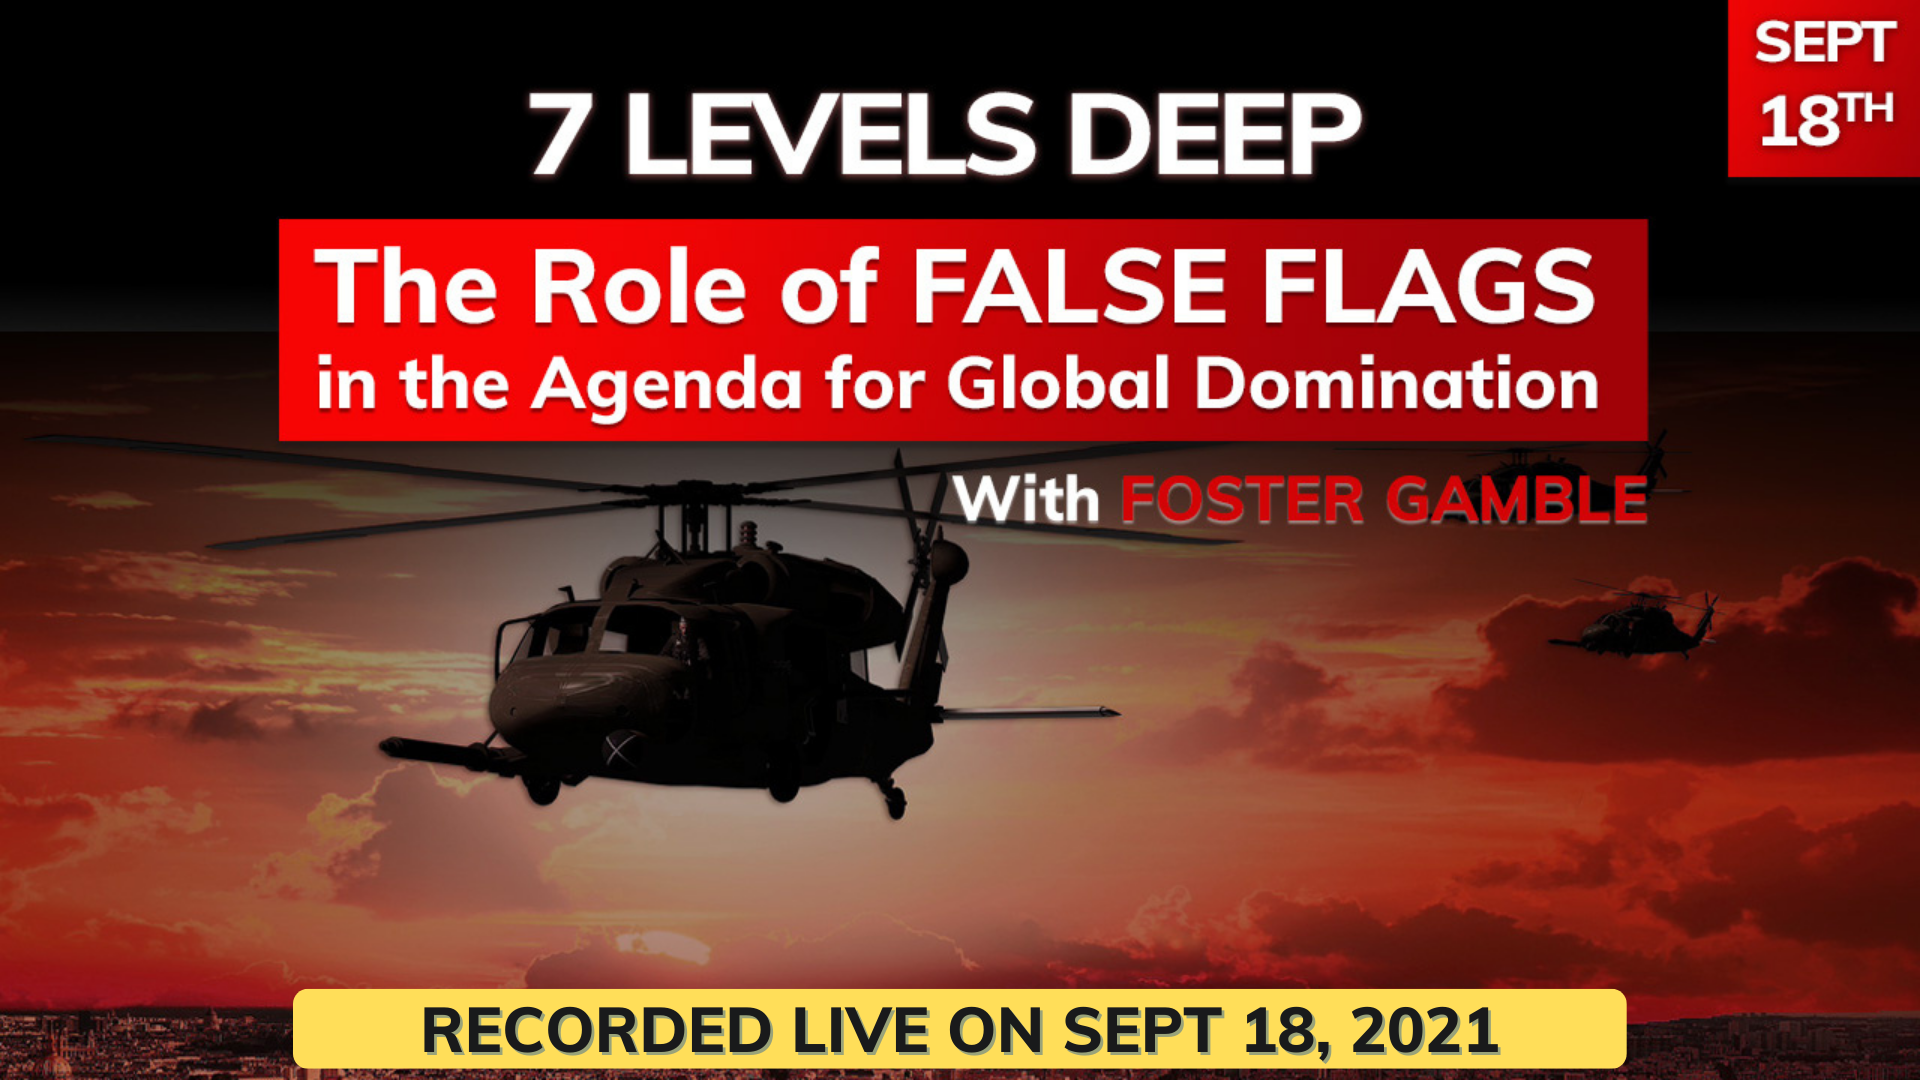 The Role of False Flags in the Agenda for Global Domination